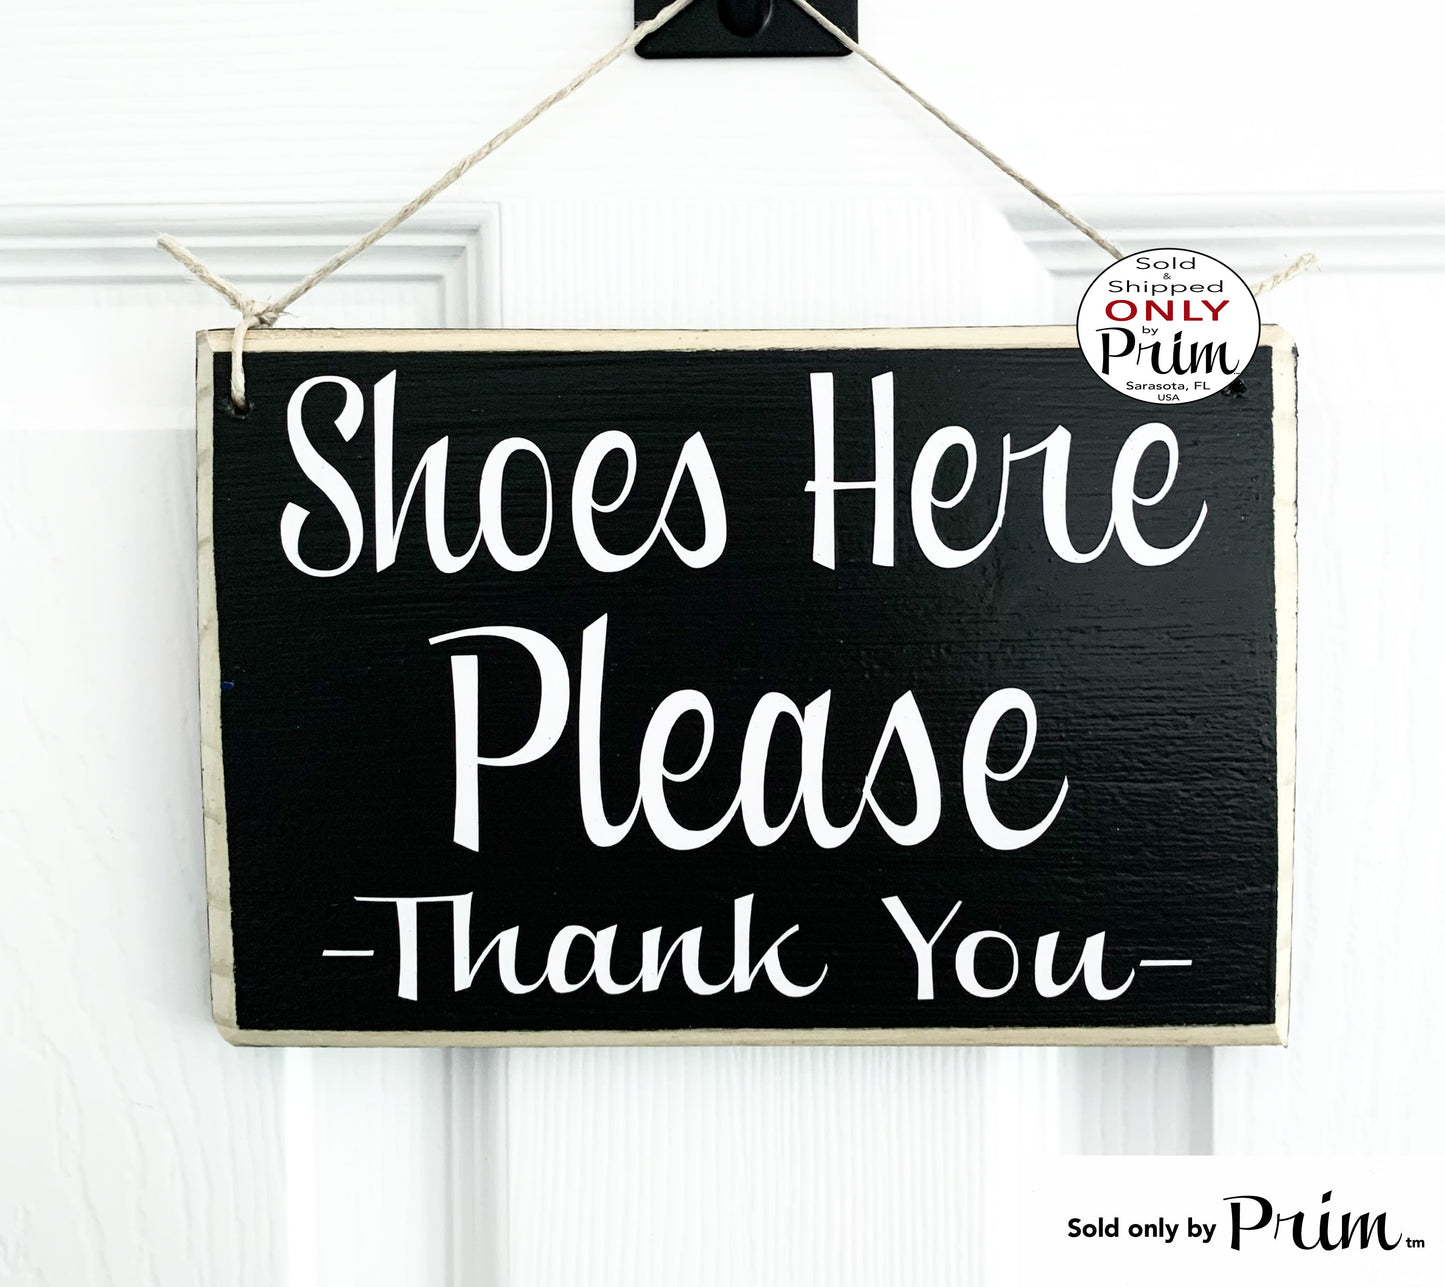 Designs by Prim 8x6 Shoes Here Thank You Custom Wood Sign Shoes Here Remove Your Shoes Bare Your Soles Welcome Wall Door Plaque